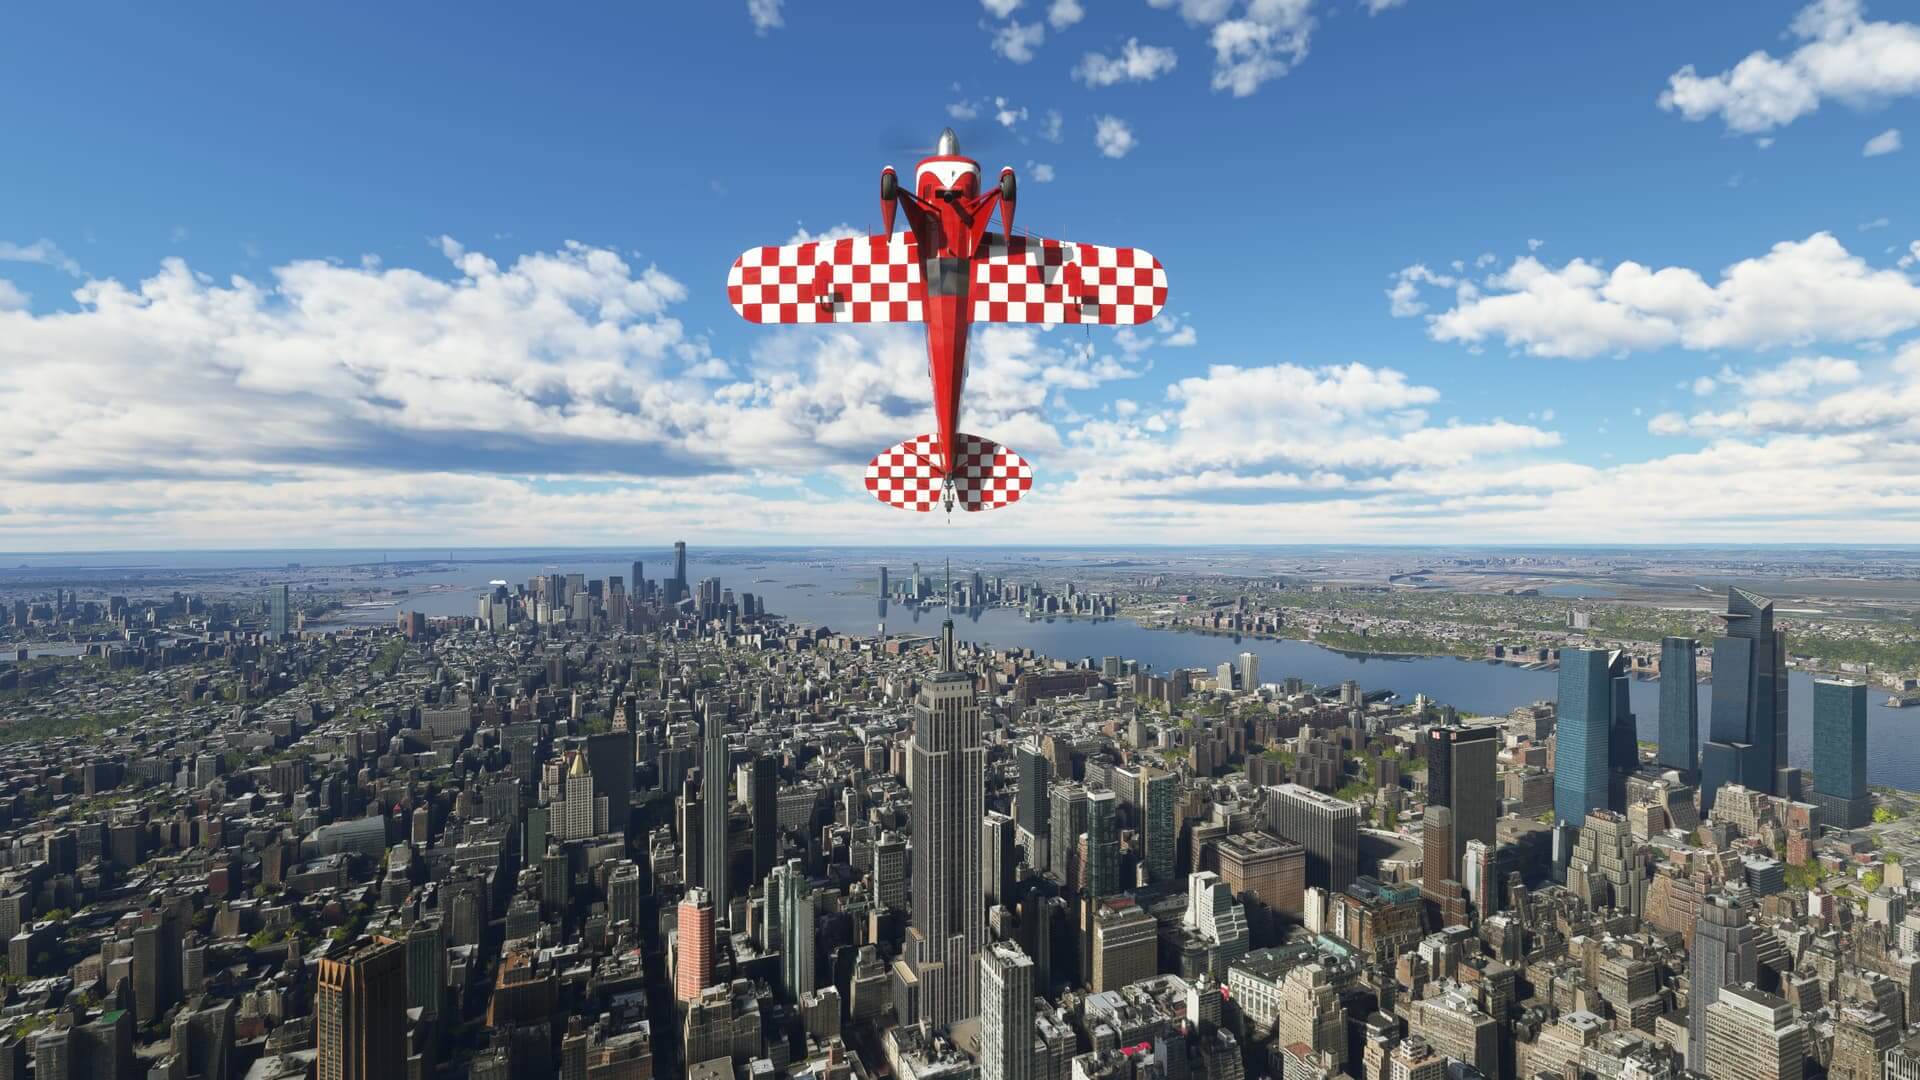 A Pitts Special flies straight up over Manhattan. The Empire State Building is visible under the plane. The camera is positioned such that the bottom wing and landing gear of the Pitts is visible.